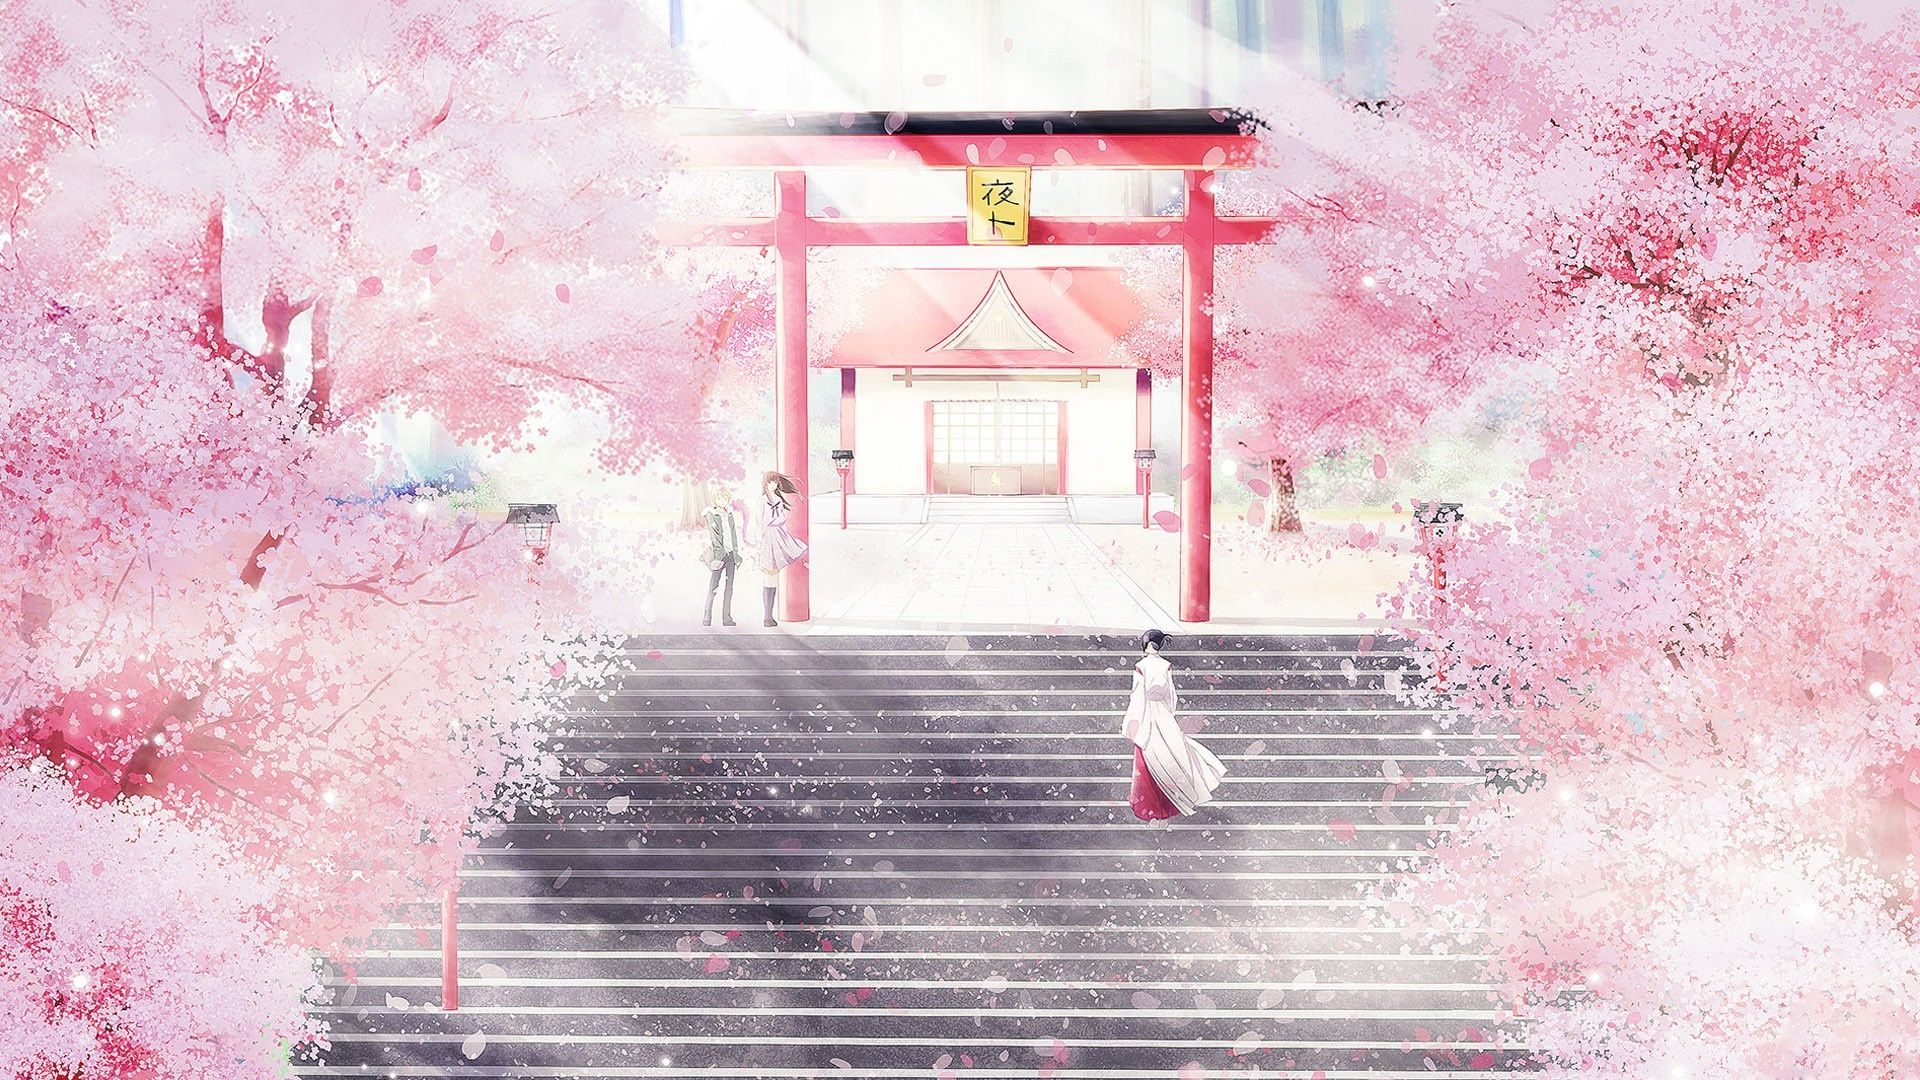 white, red, wall, house, cherry blossom, pink, spring, Noragami, Iki Hiyori, shrine, cherry trees, color, flower, shape Gallery HD Wallpaper